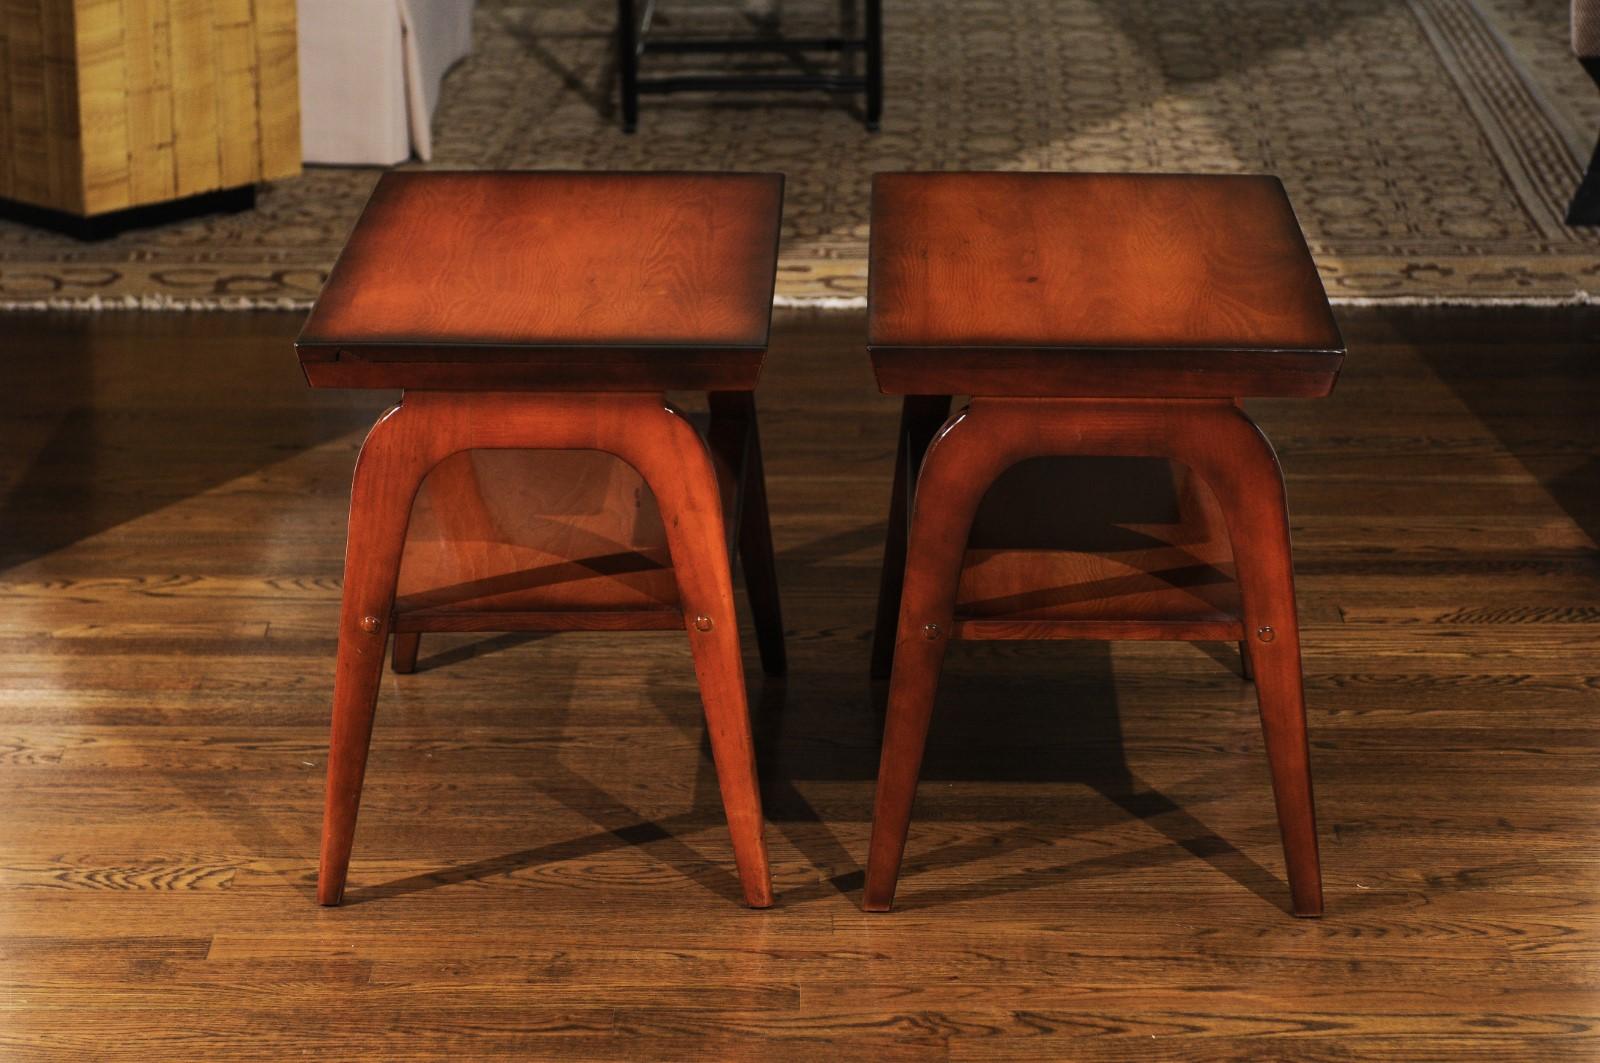 Rare Restored Pair of End Tables by John Wisner for Ficks Reed, circa 1954 In Excellent Condition For Sale In Atlanta, GA